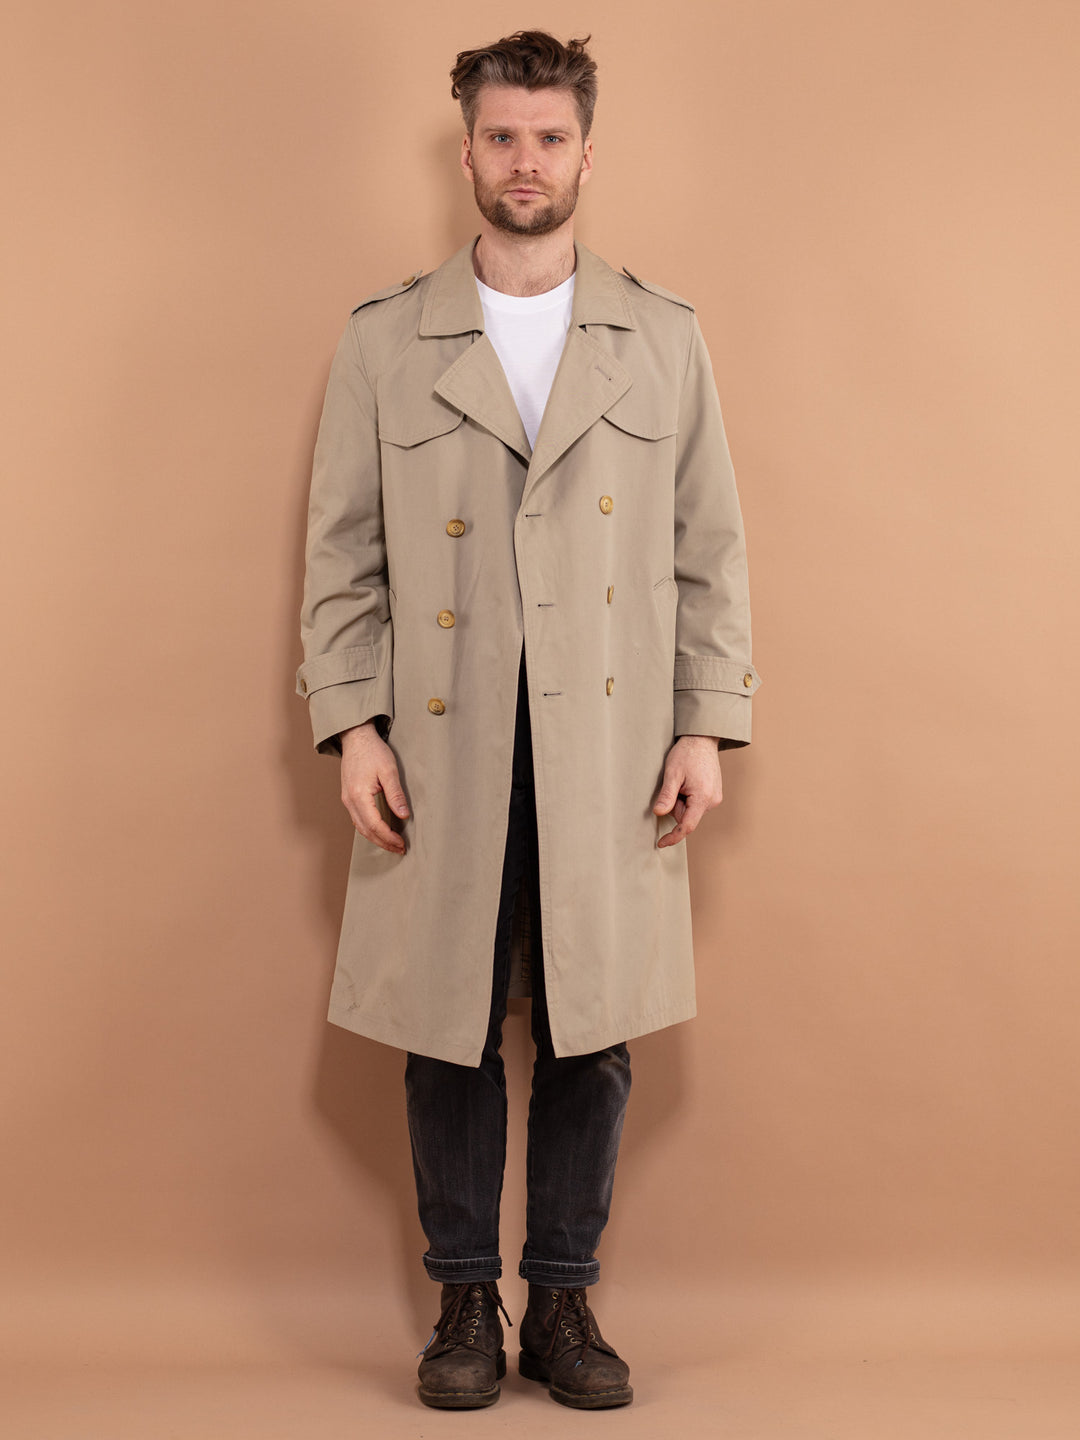 90's Classic Trench Coat, Size M Vintage Trench Coat, Double Breasted Coat, Office Coat, Men Clothing, Spring Coat, Minimalist Outerwear